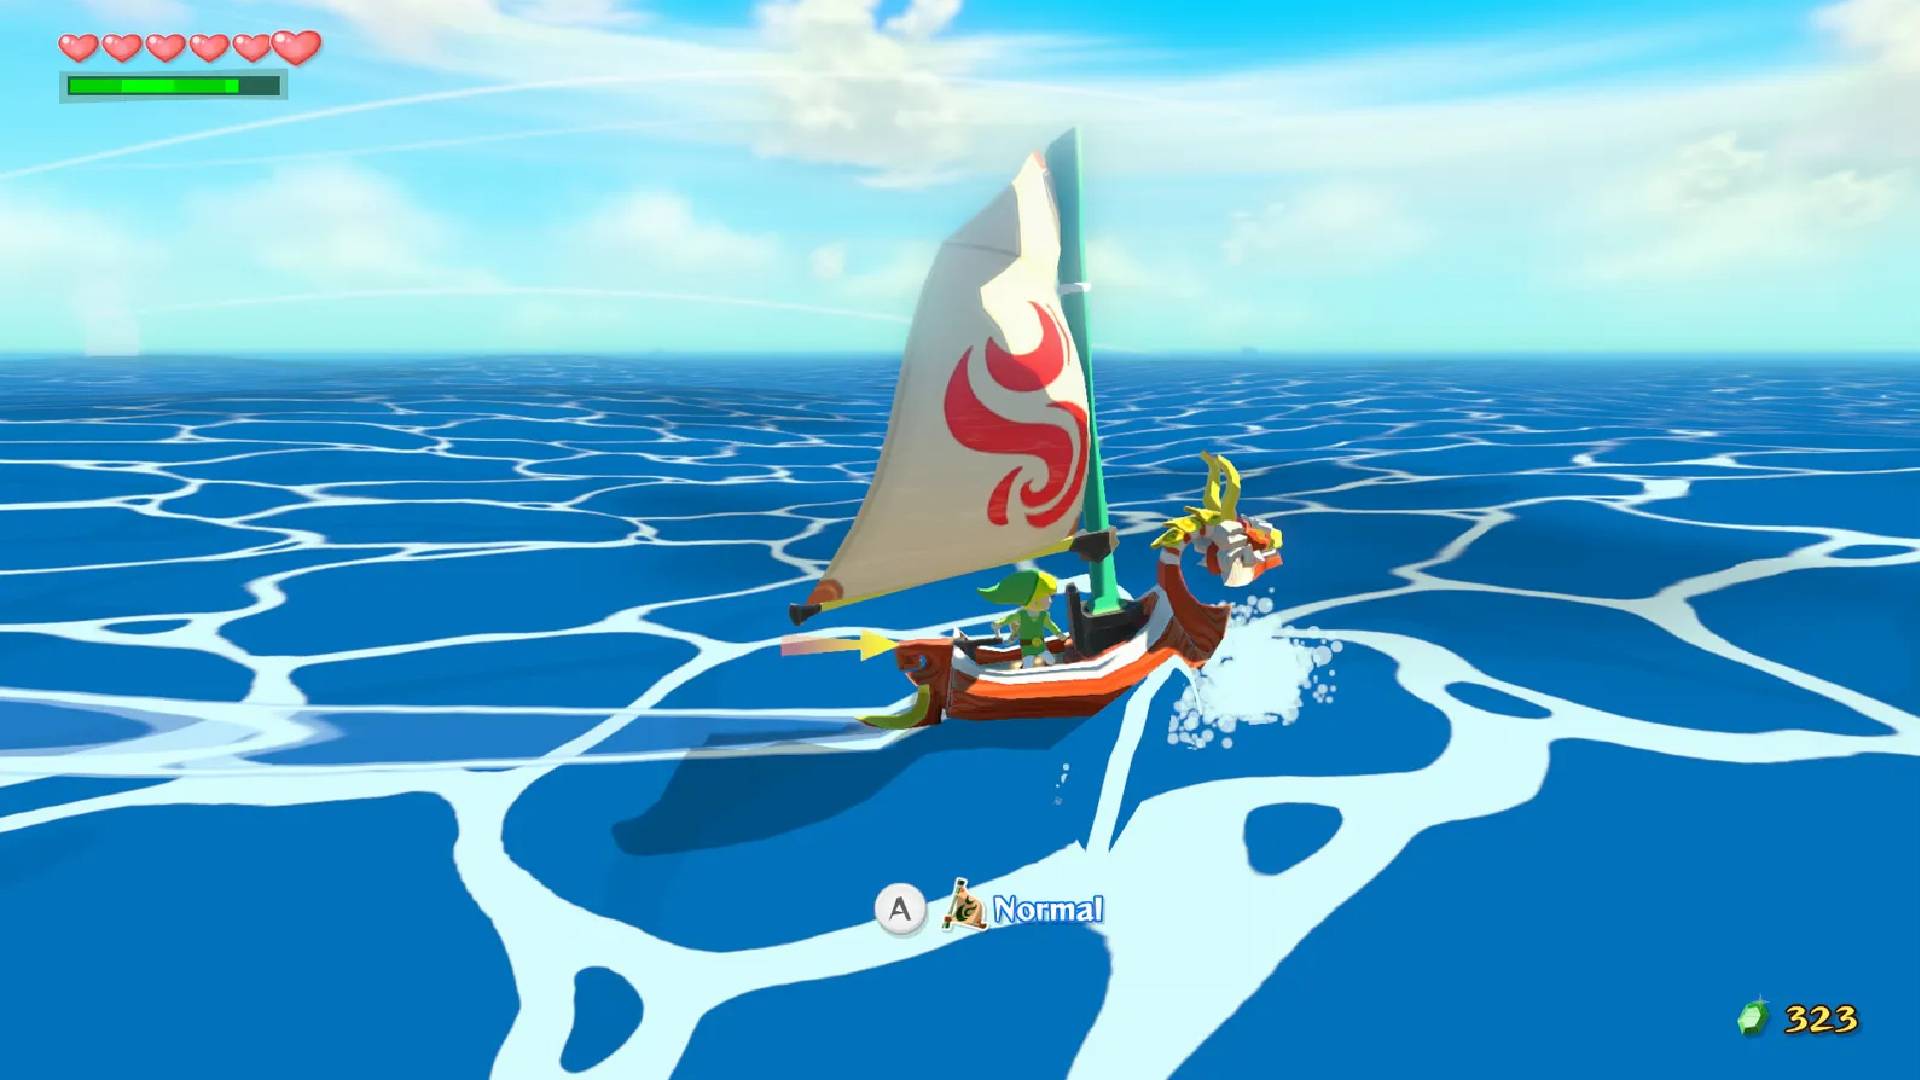 Zelda: The Wind Waker Remake Might Come To The Switch In 2023